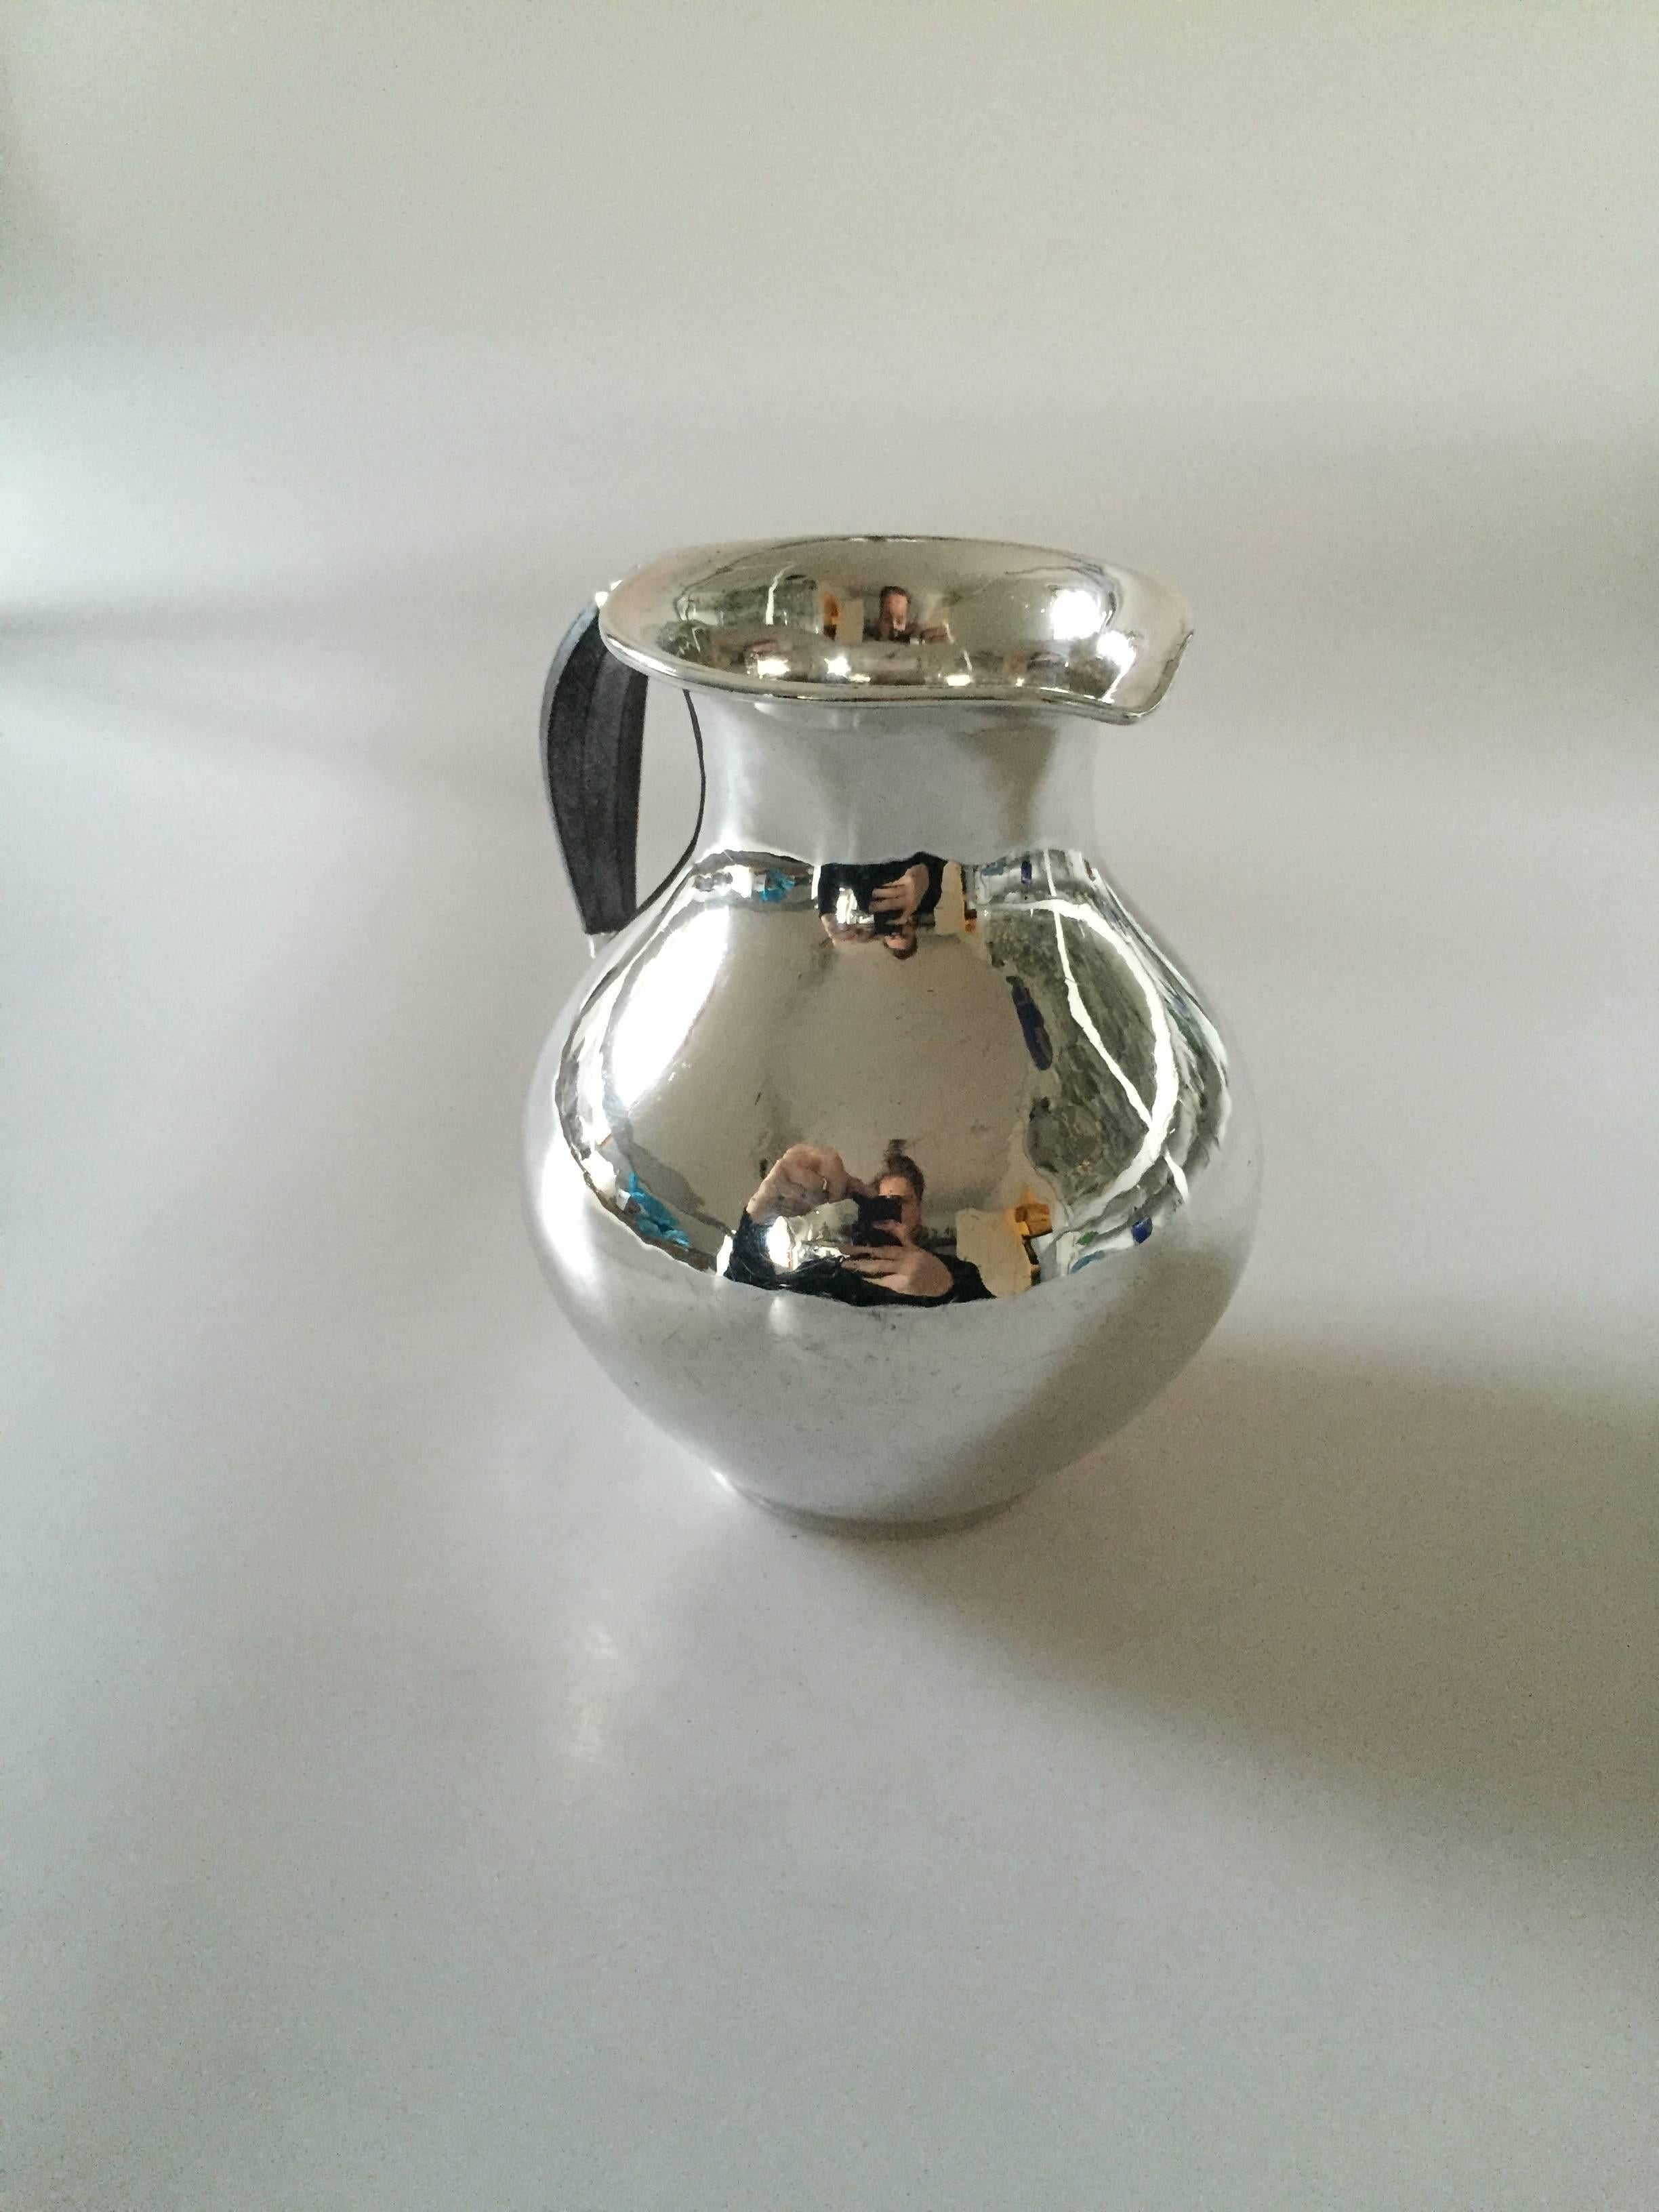 Georg Jensen sterling silver pitcher #385B. From the 1920s.

Measures: 14 cm H.